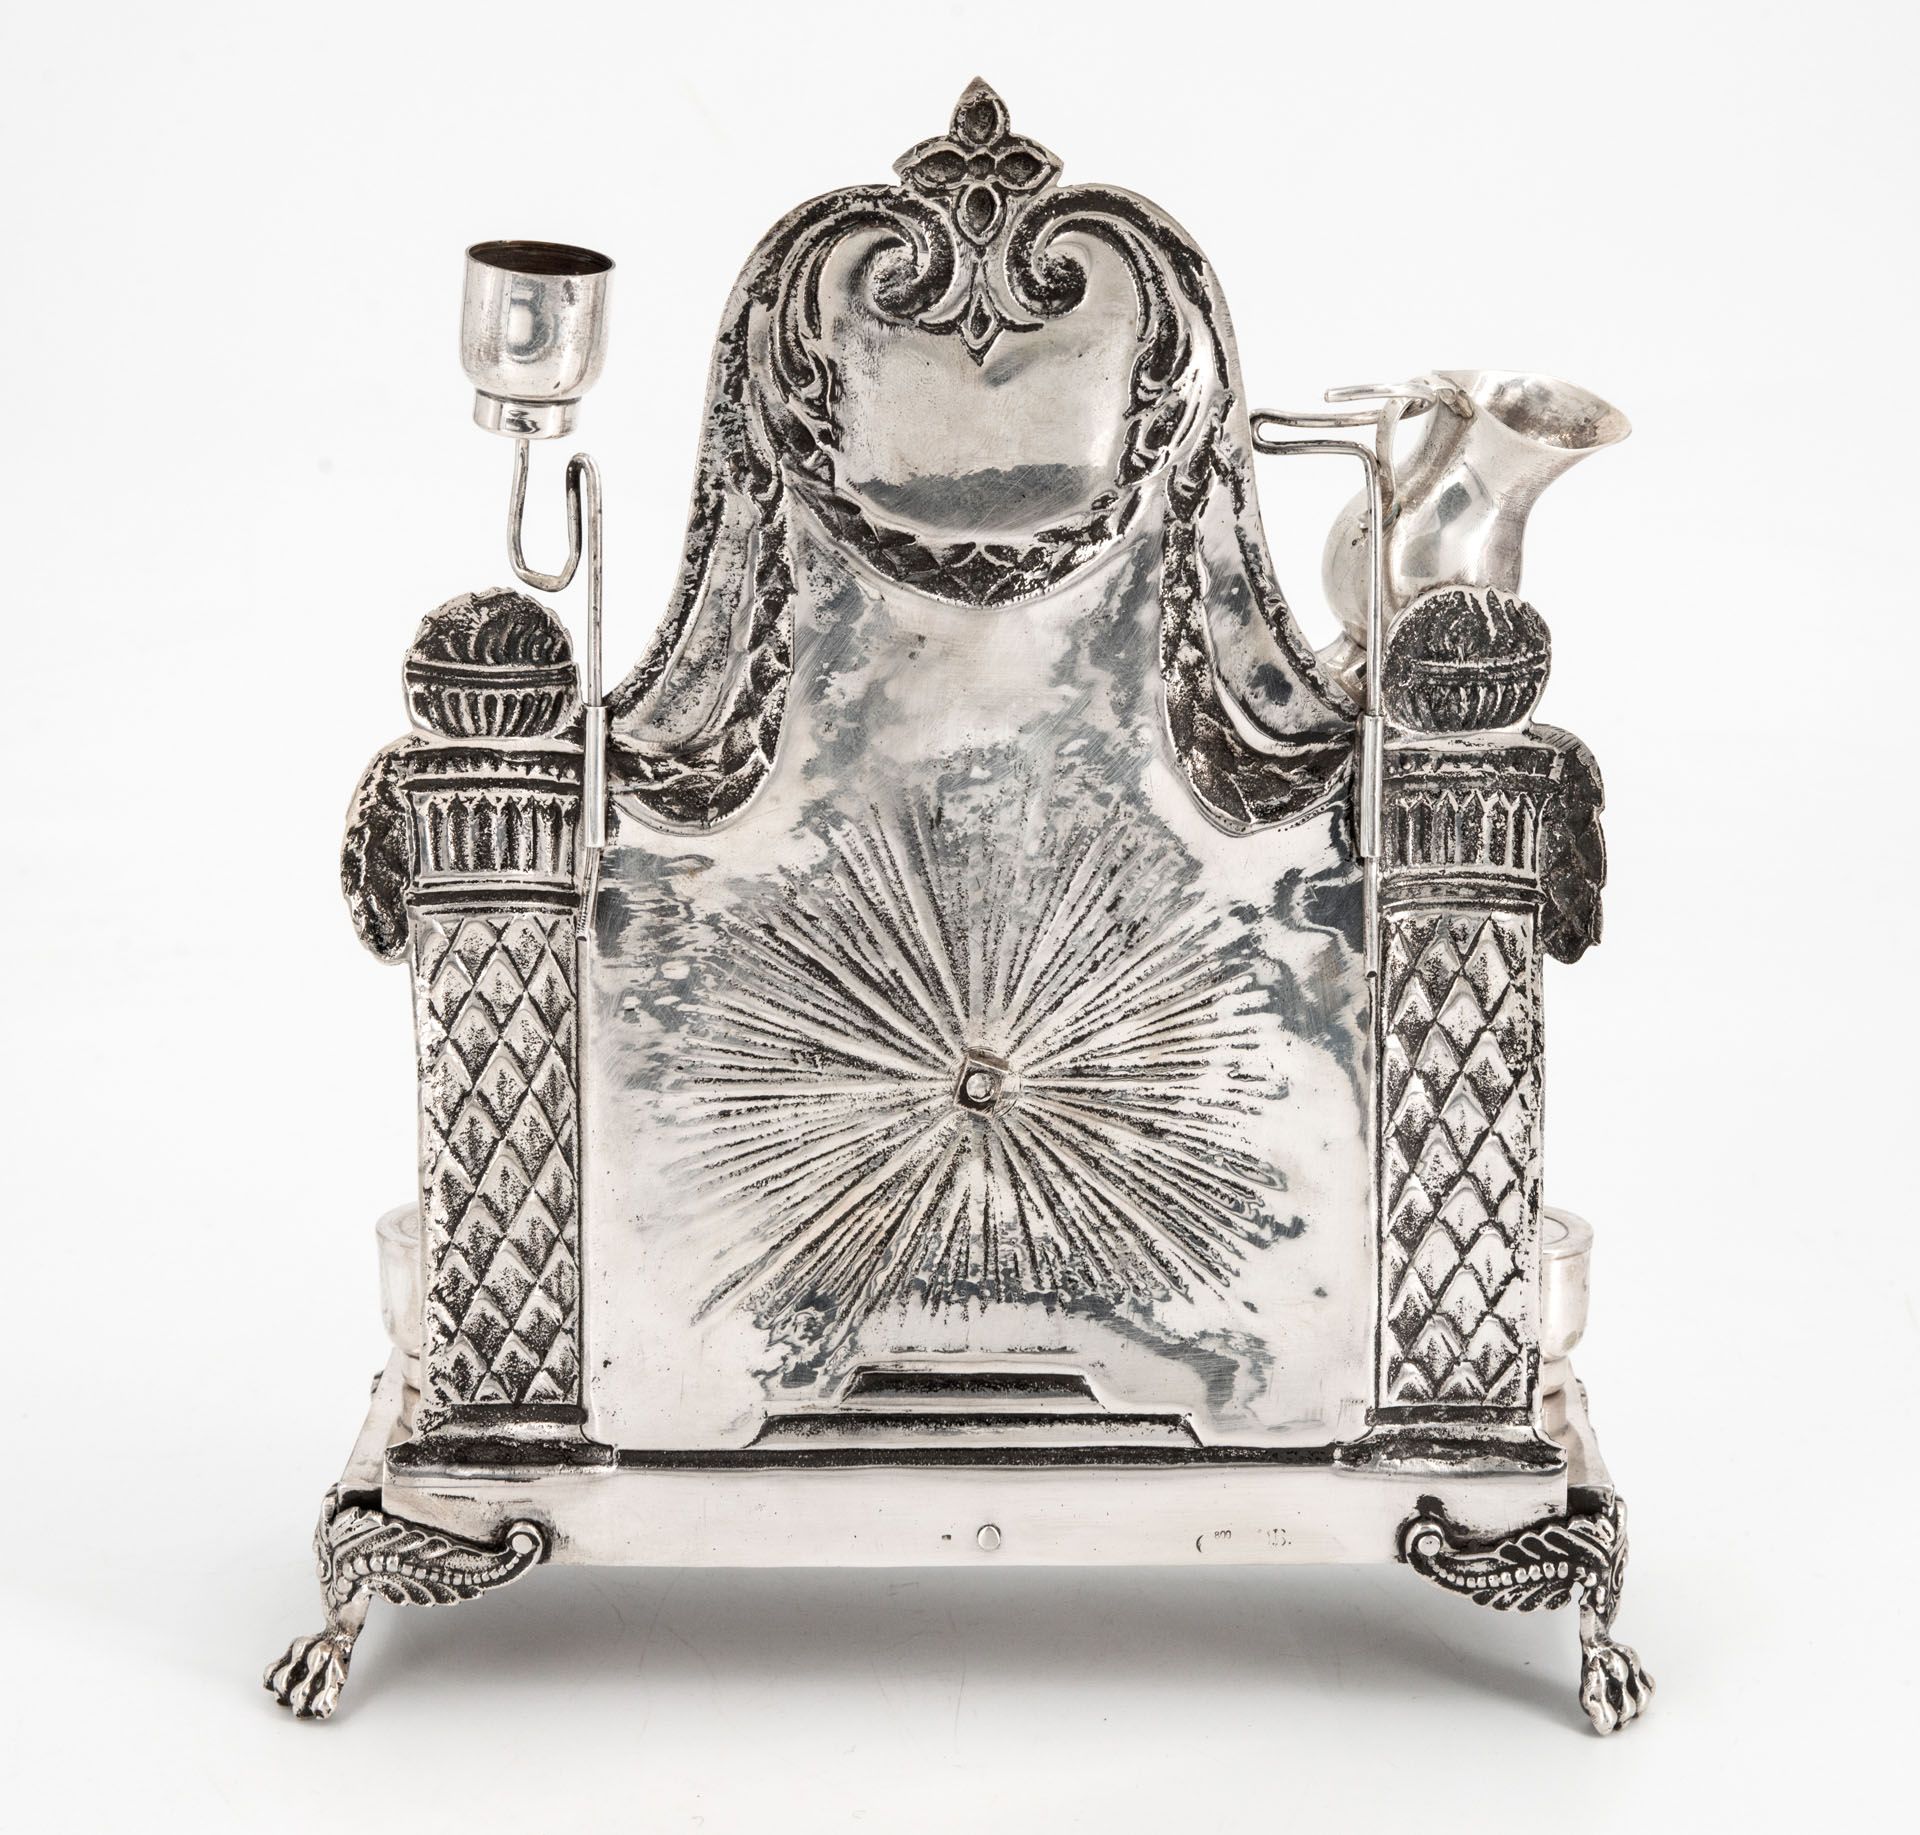 A Nice Silver Hanukkah Lamp, Germany, Early 20th Century - Image 3 of 3